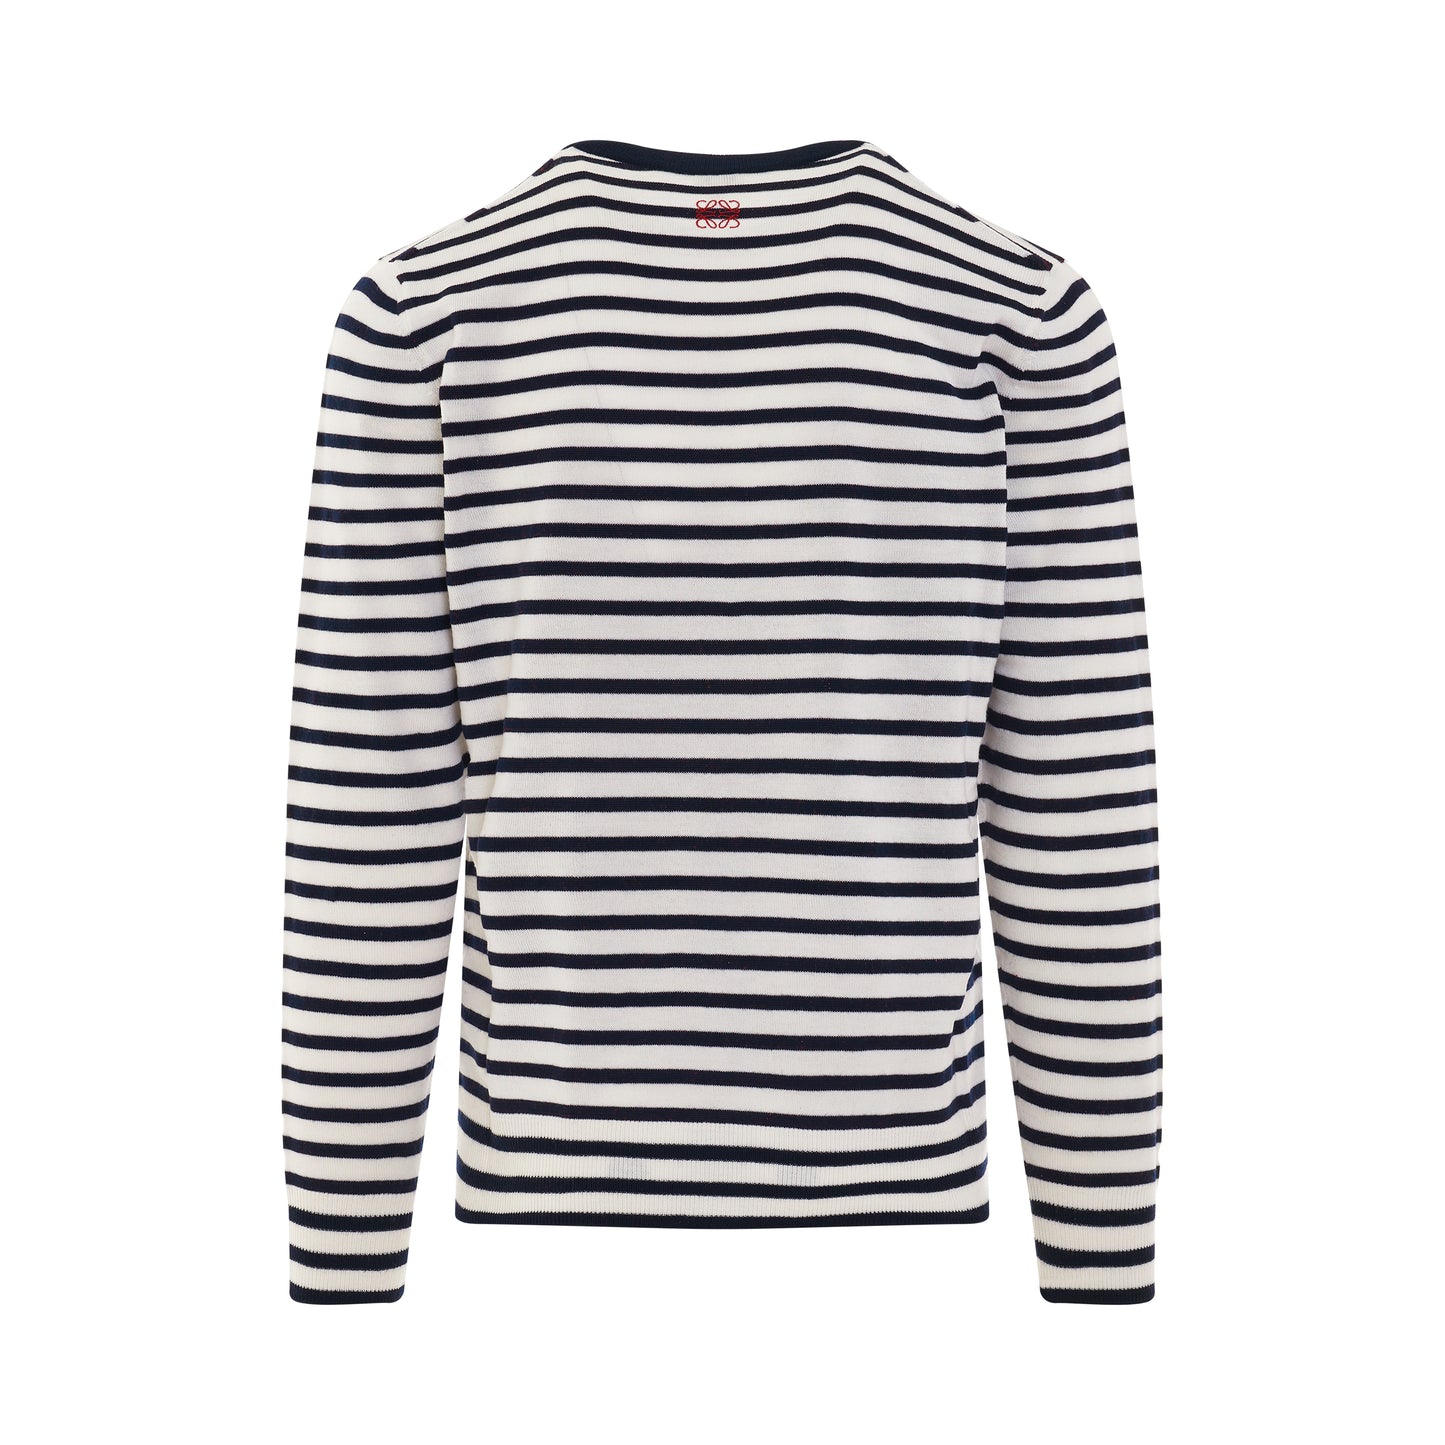 Striped Sweater in Navy/White